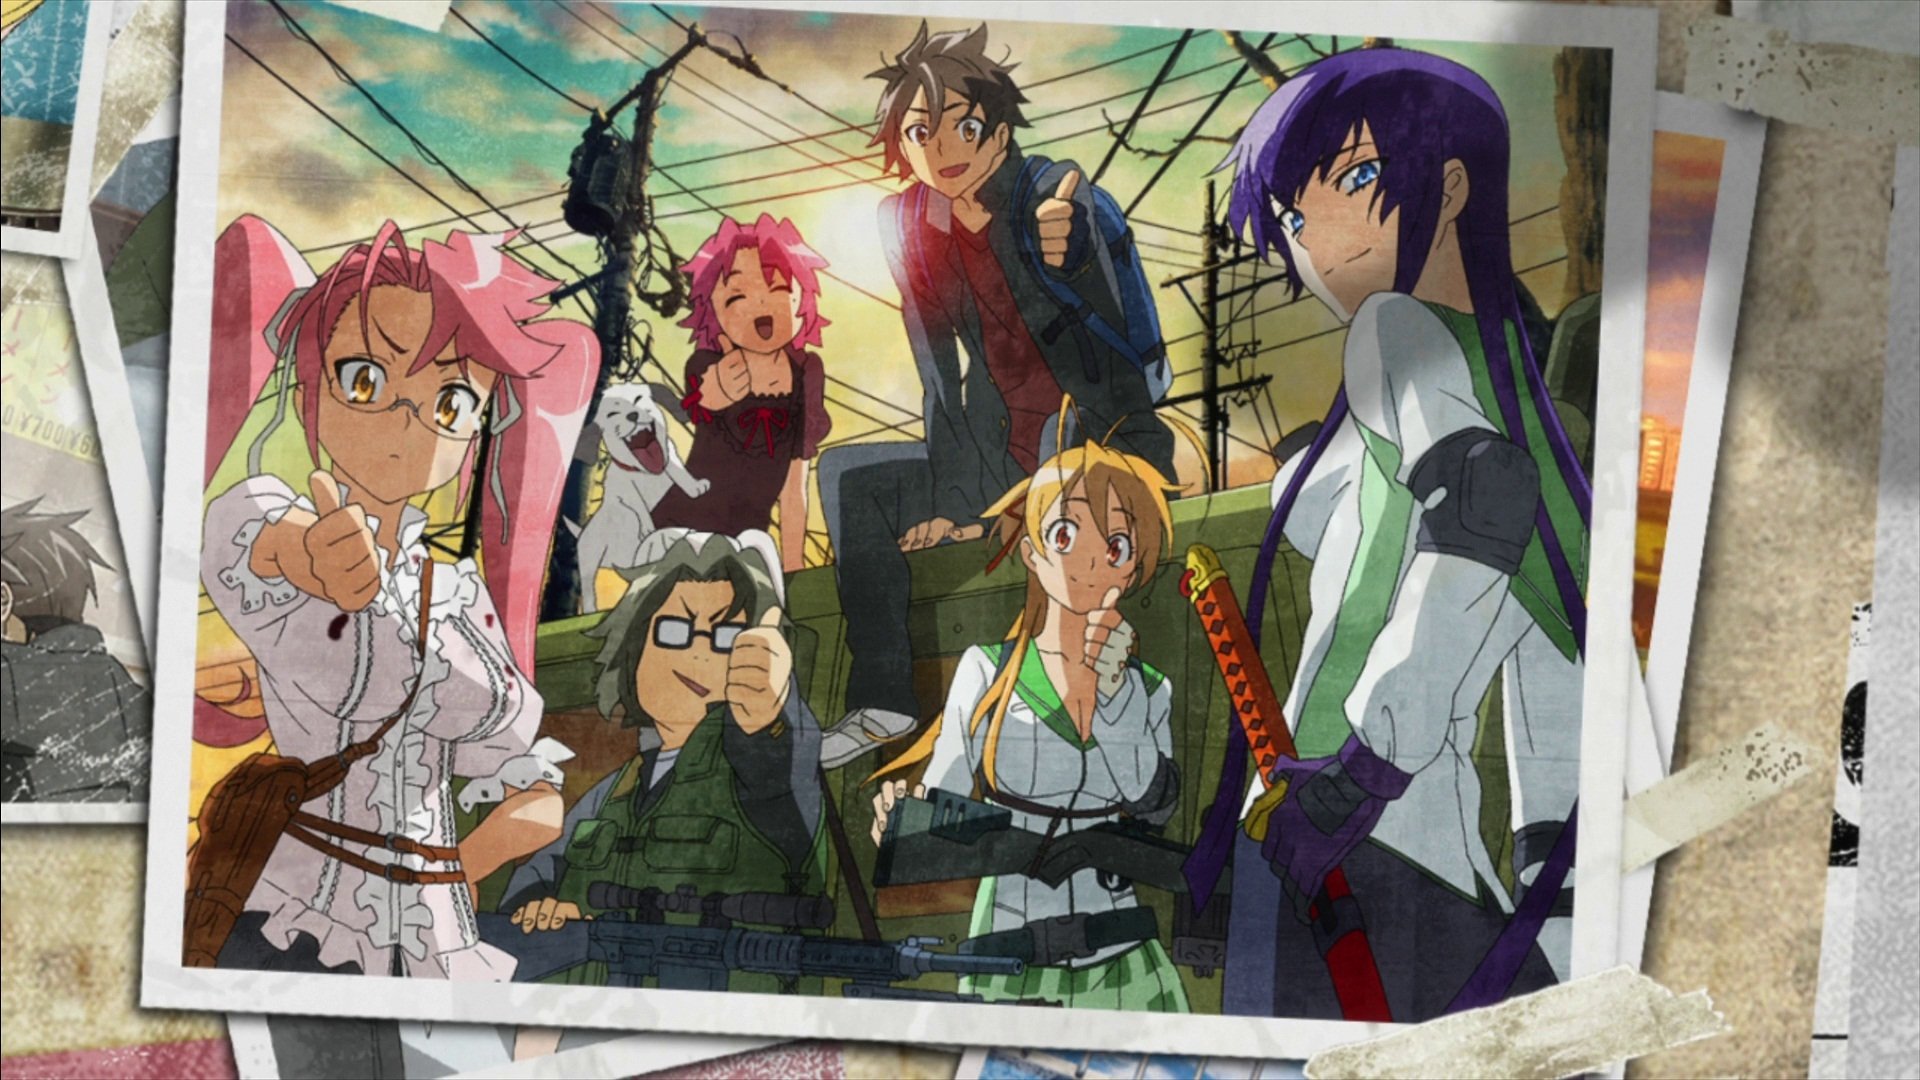 High school of the dead wallpapers